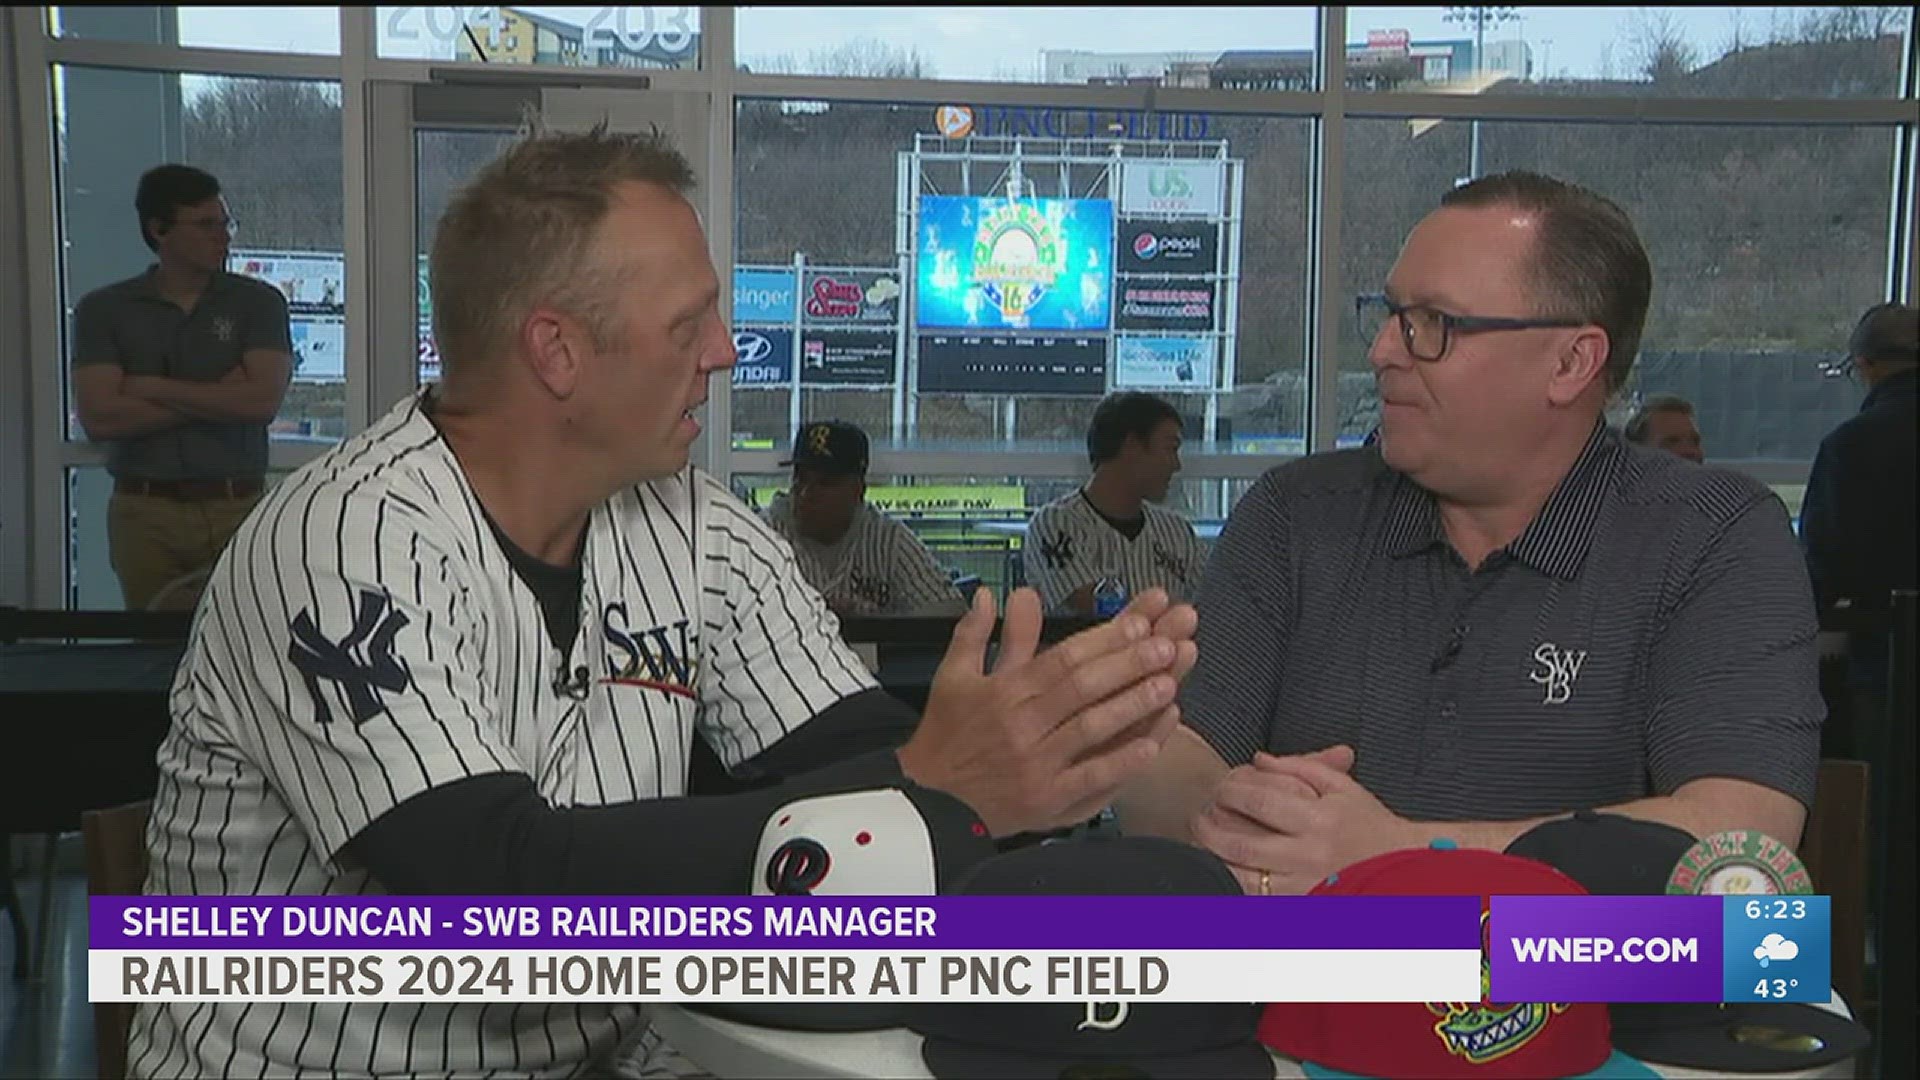 Duncan discusses the 2024 Home Opener at PNC Field